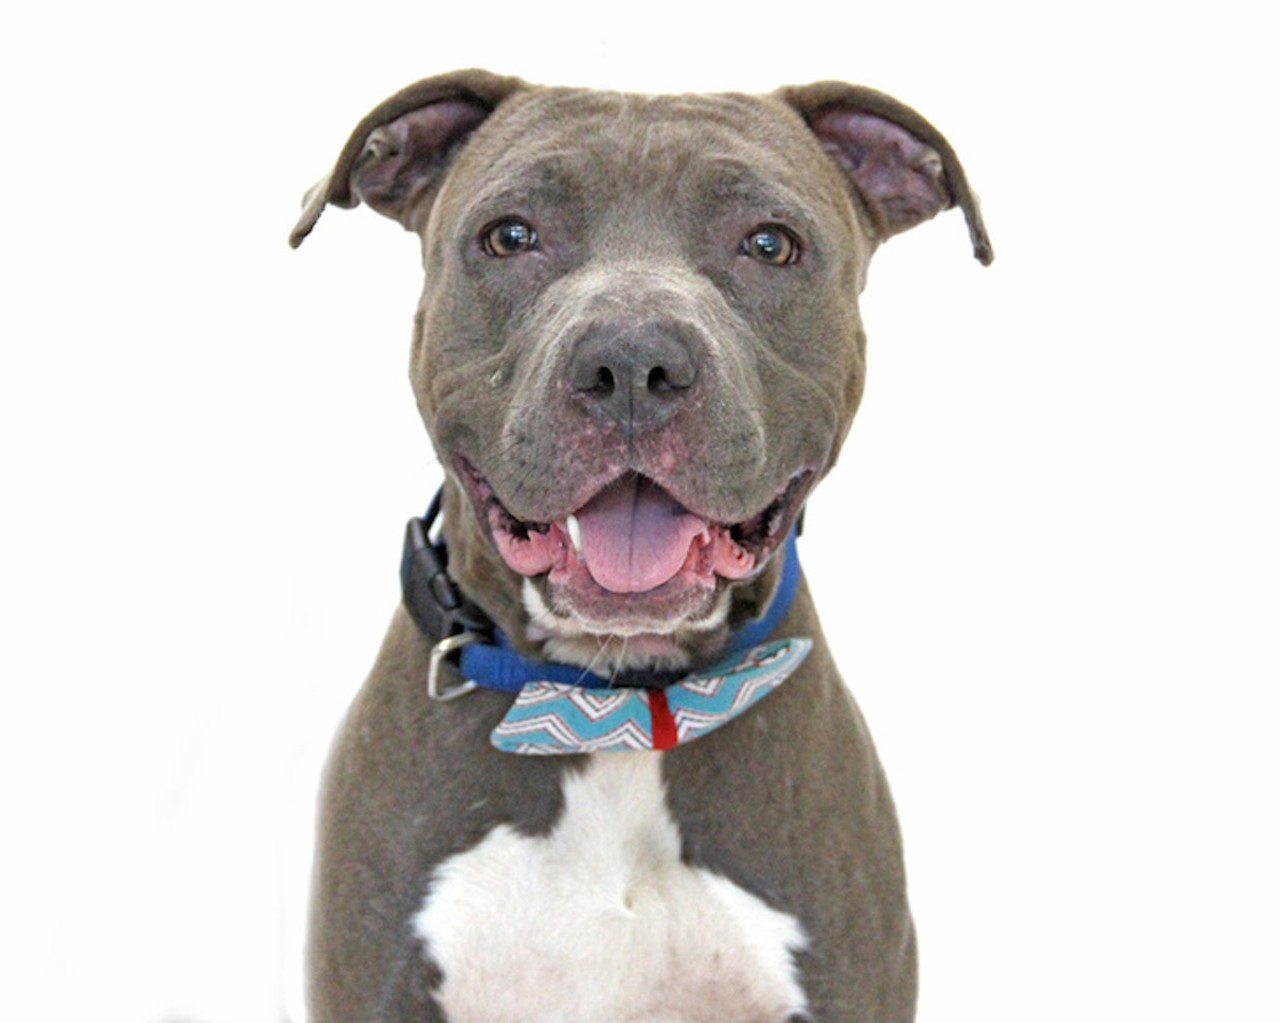 10 adorable adoptable dogs in Orlando who needs homes now